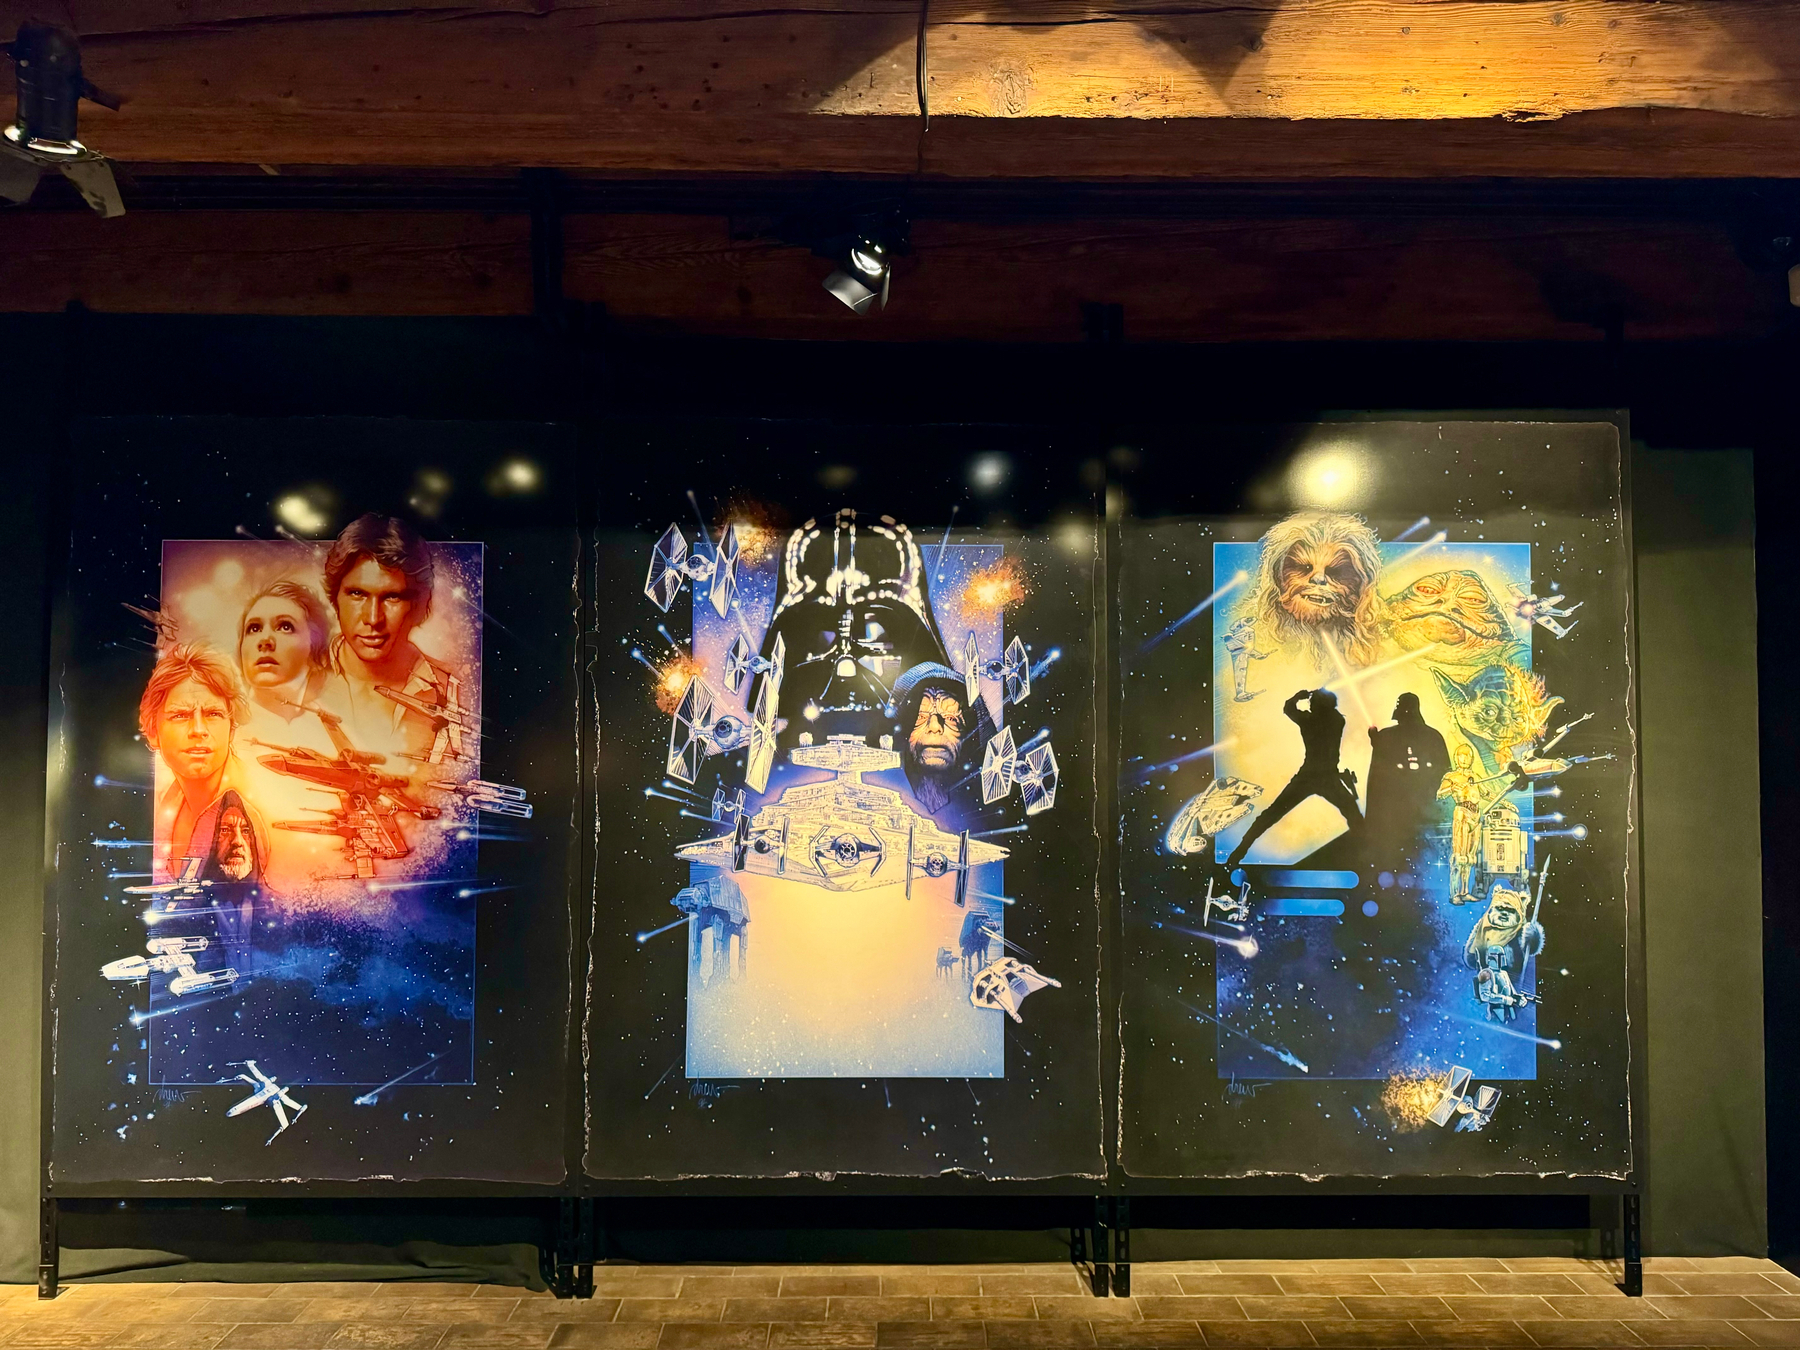 Three large posters depicting characters and spacecraft from the Star Wars franchise displayed on a black wall beneath wooden beams, with spotlights shining on them.